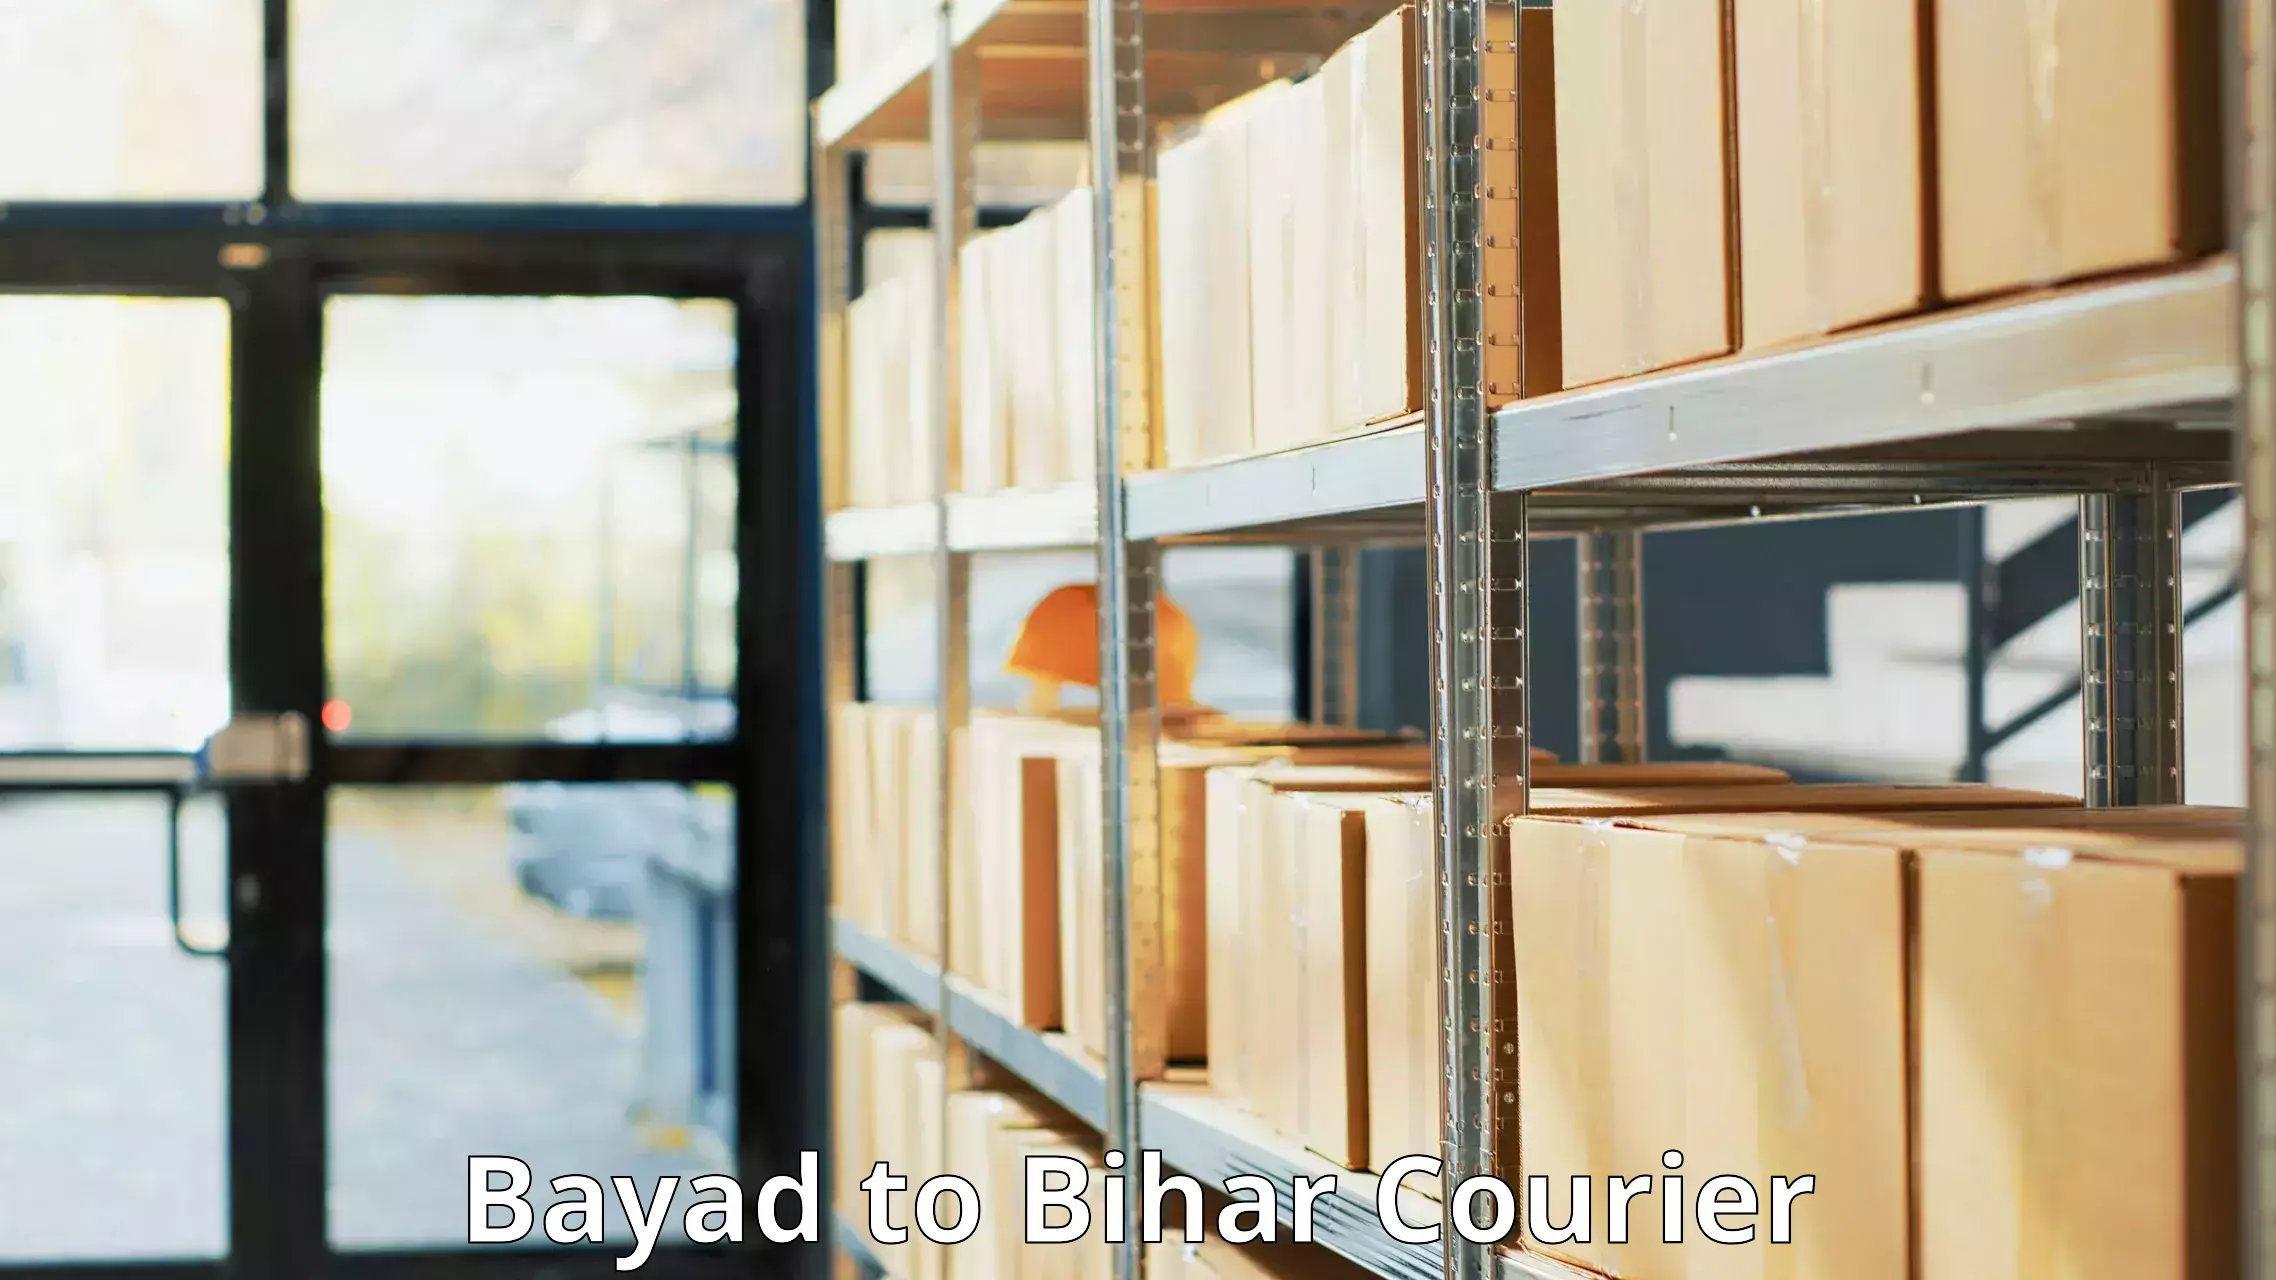 Affordable parcel service Bayad to Piro